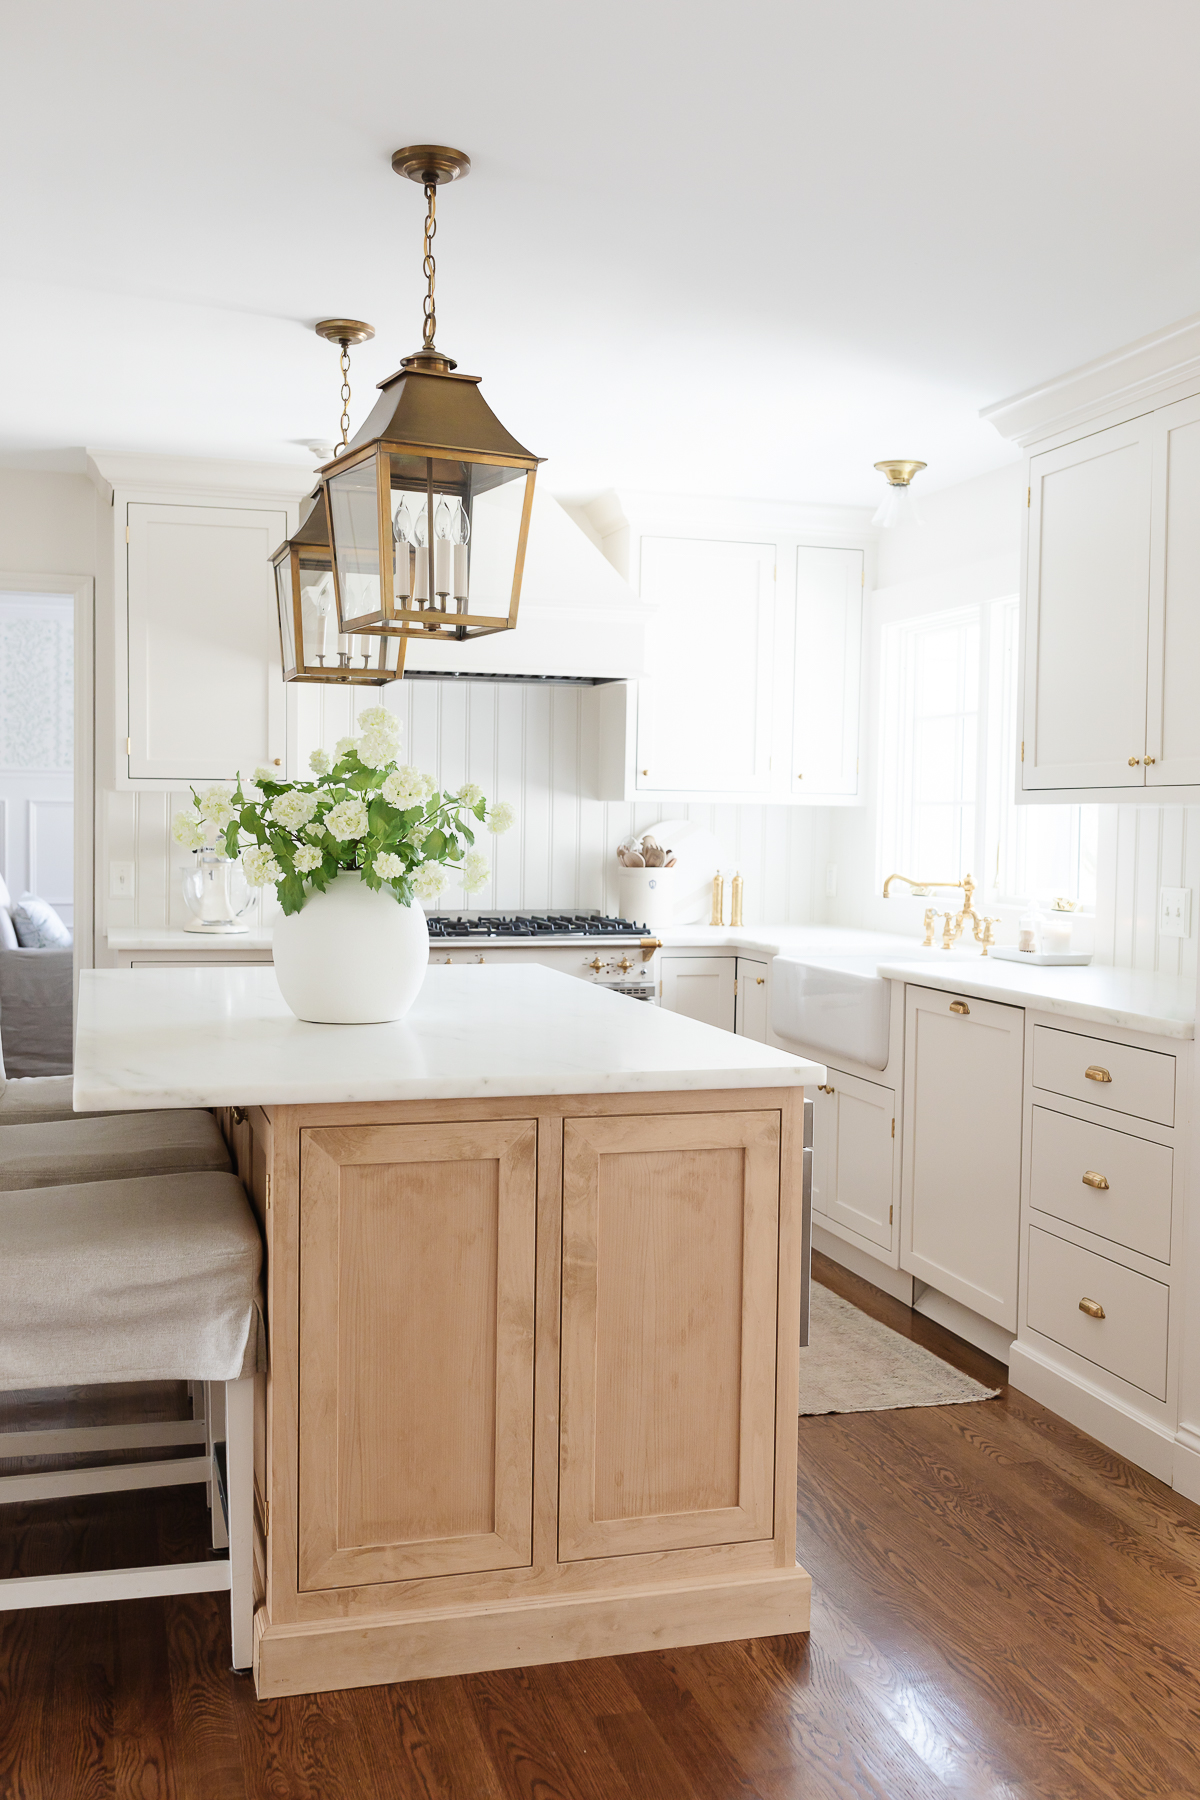 A white kitchen with custom cabinetry and wooden floors, complete with a white island.